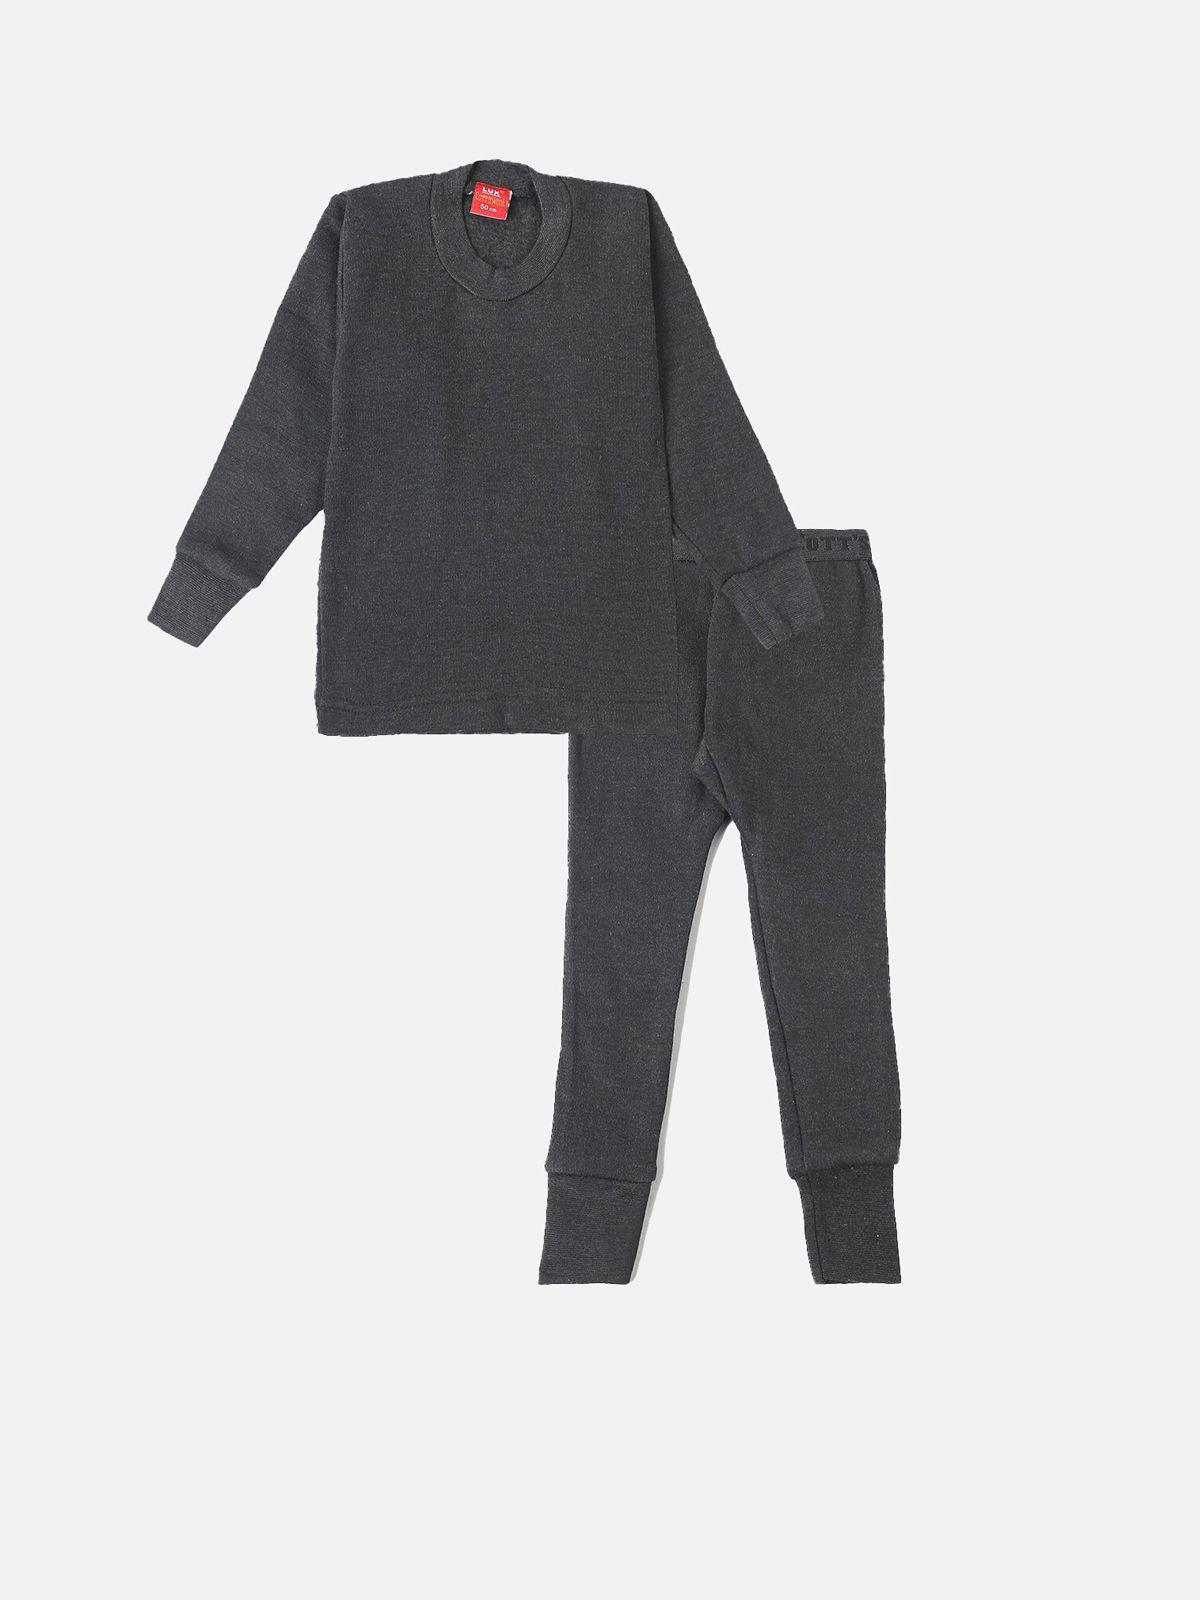 Lux Cottswool Boys Charcoal Grey Solid Knitted Cotton Slim-Fit Thermal Set